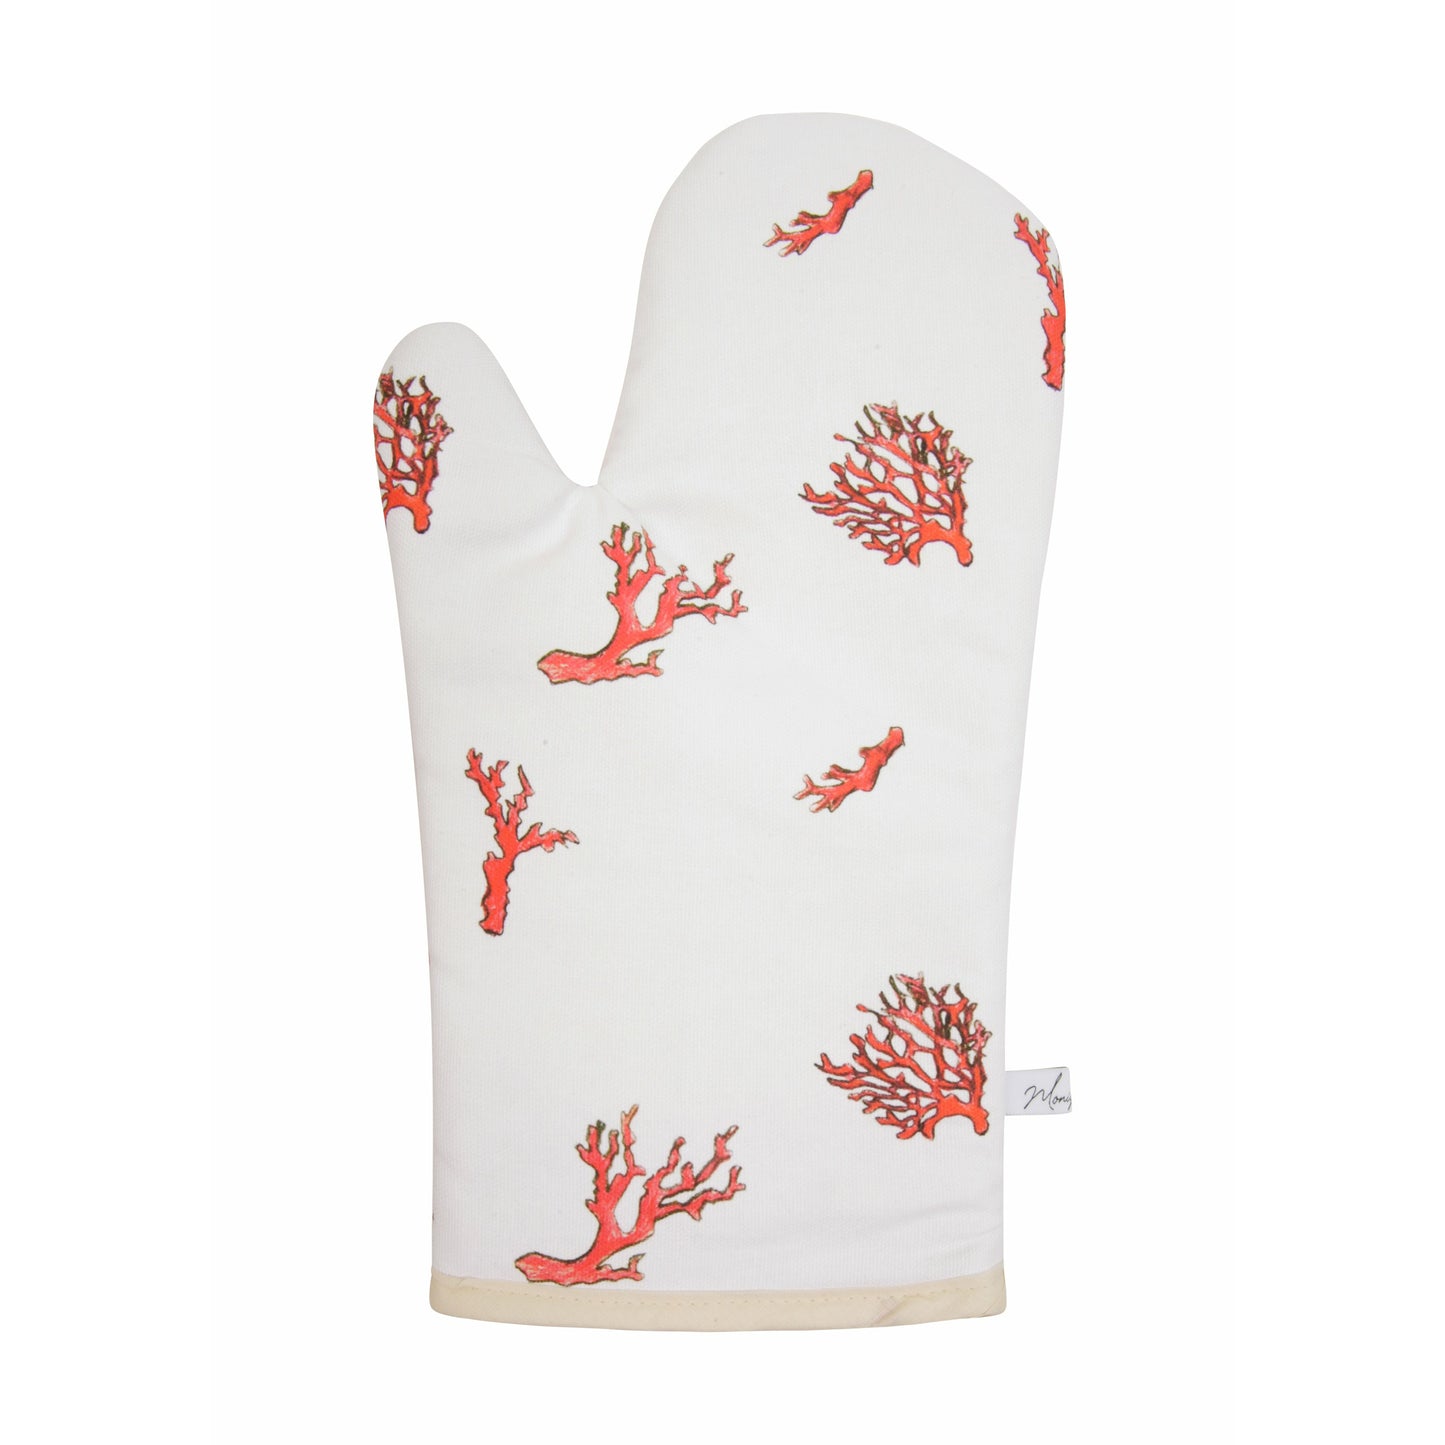 Coral Print Oven Glove on white backround 